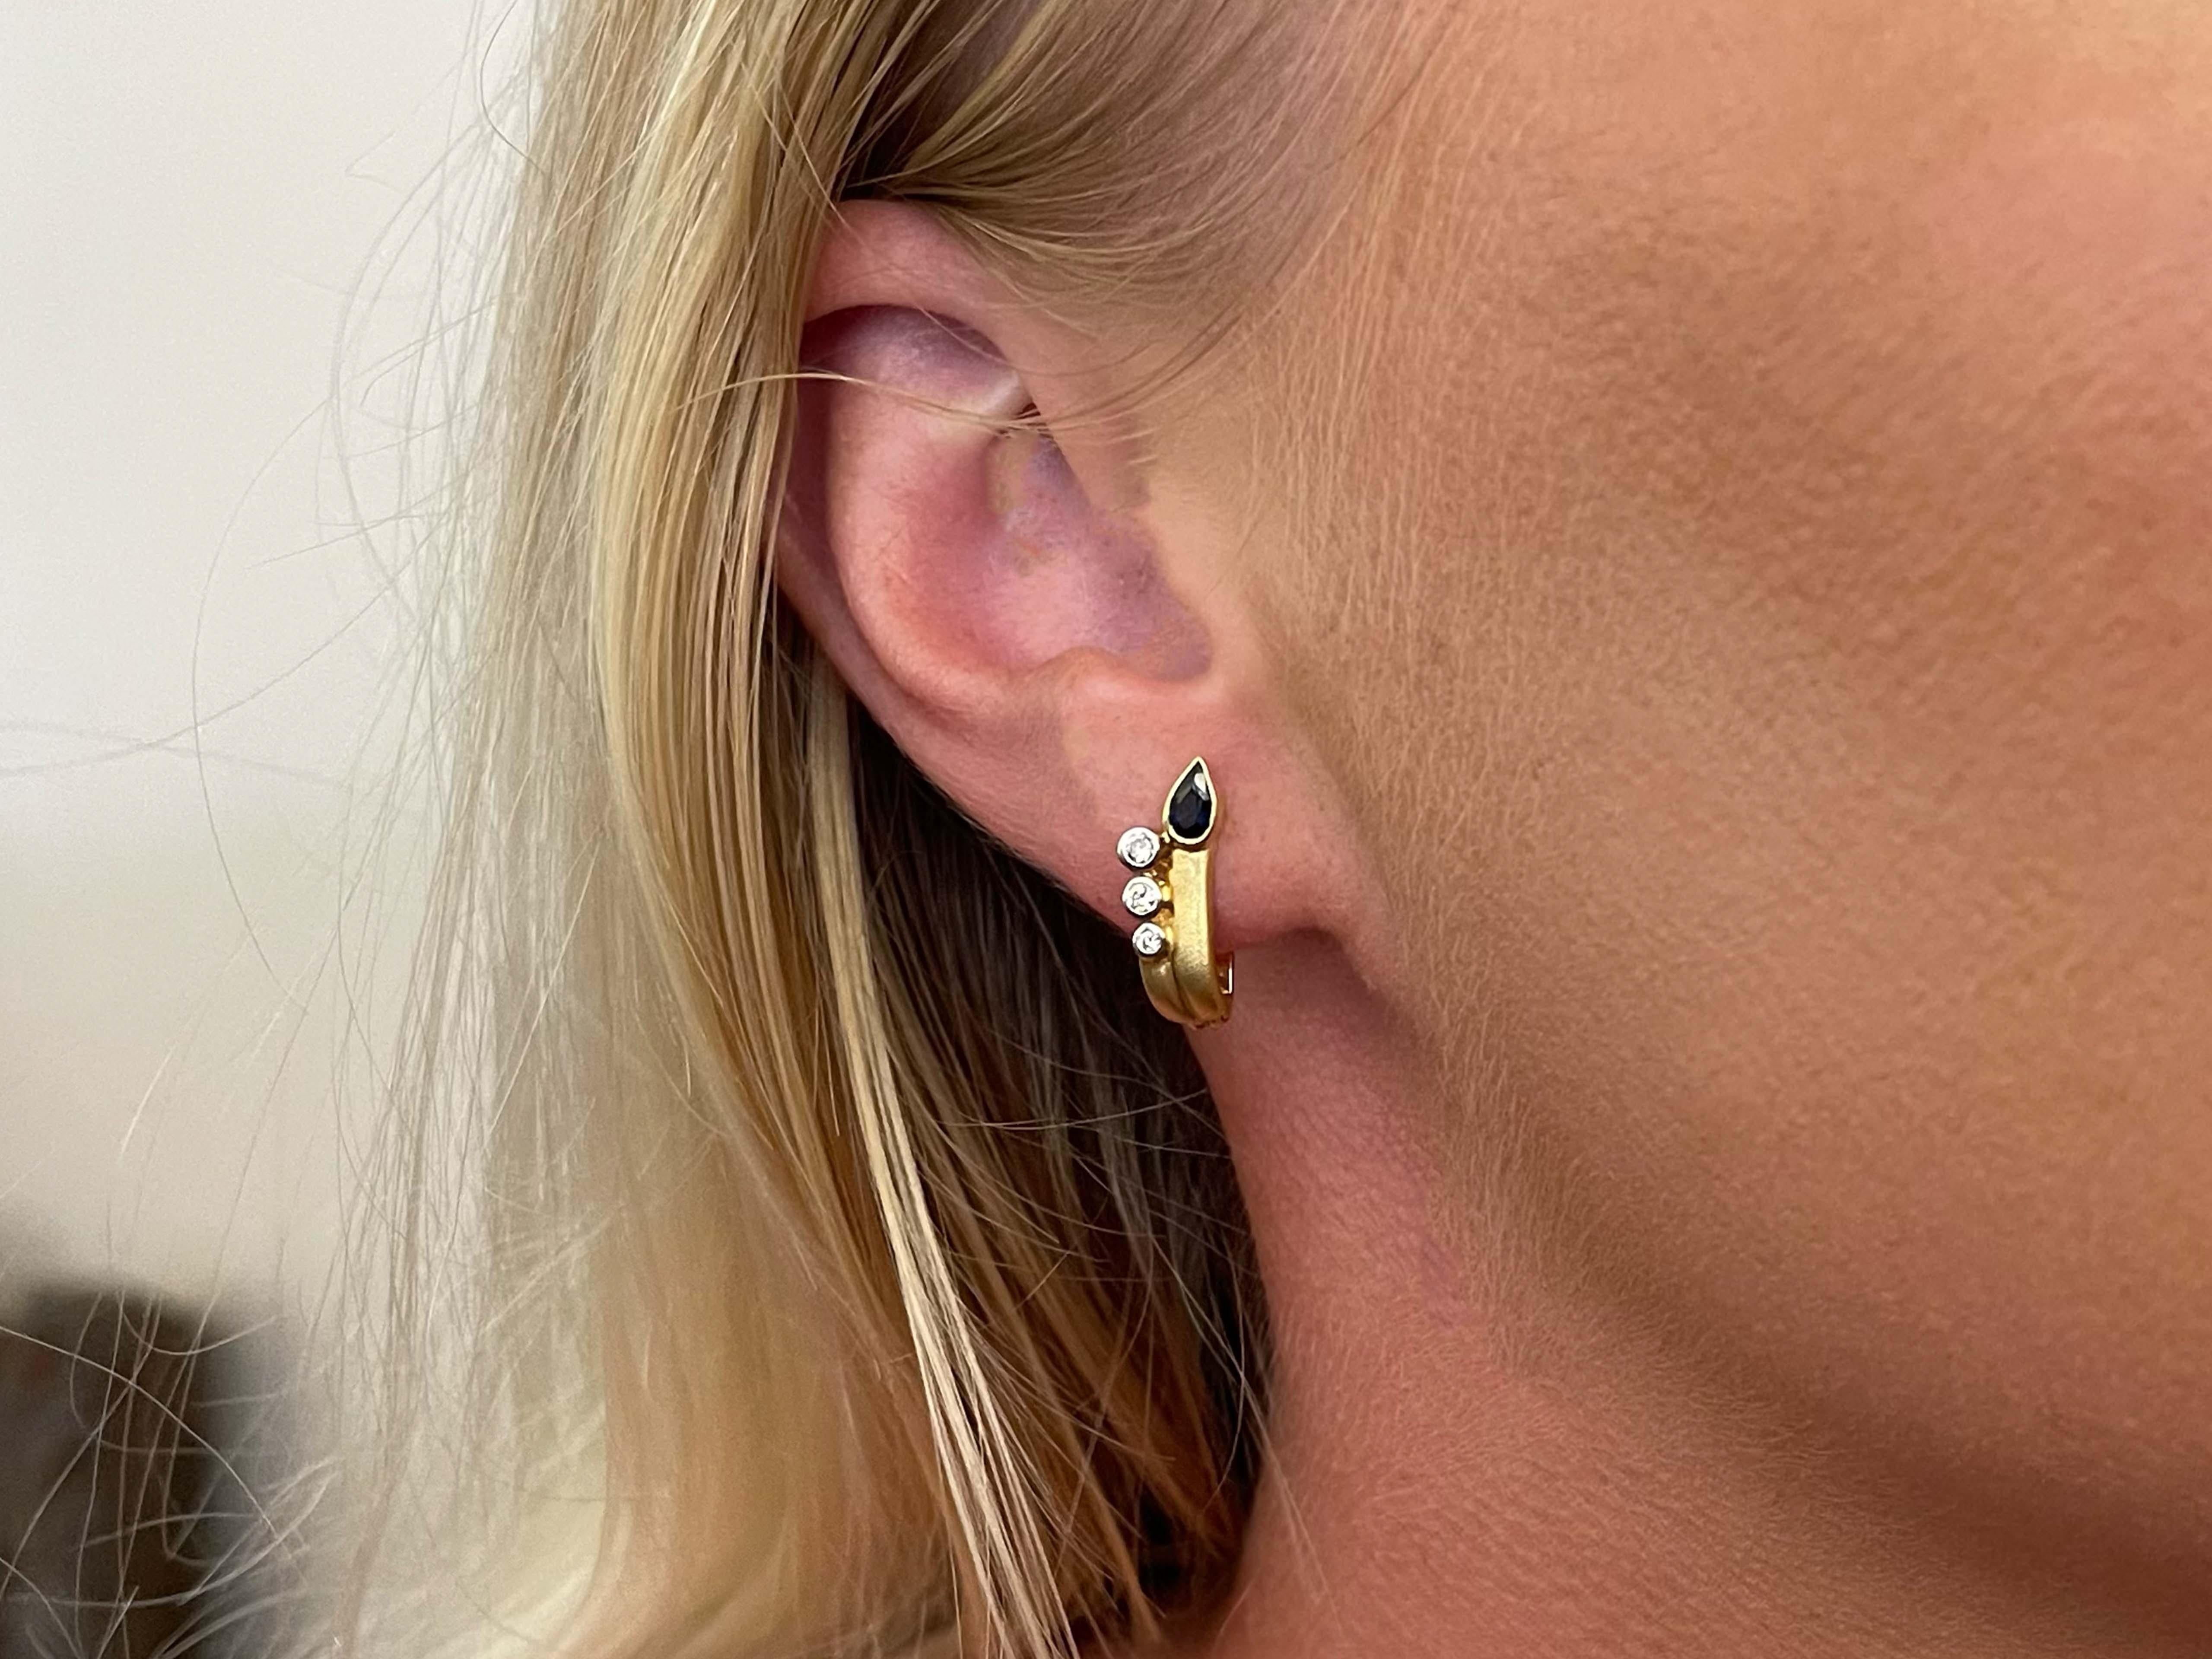 Earrings Specifications:

Metal: 18k Yellow Gold

Earring Length: 18 mm

Total Weight: 4.2 Grams
​
​Gemstone: blue sapphire
​
​Sapphire Carat Weight: ~0.20 carats

Diamonds: 6

Diamond Color: J-K

Diamond Clarity: VS

Condition: Preowned

Stamped: